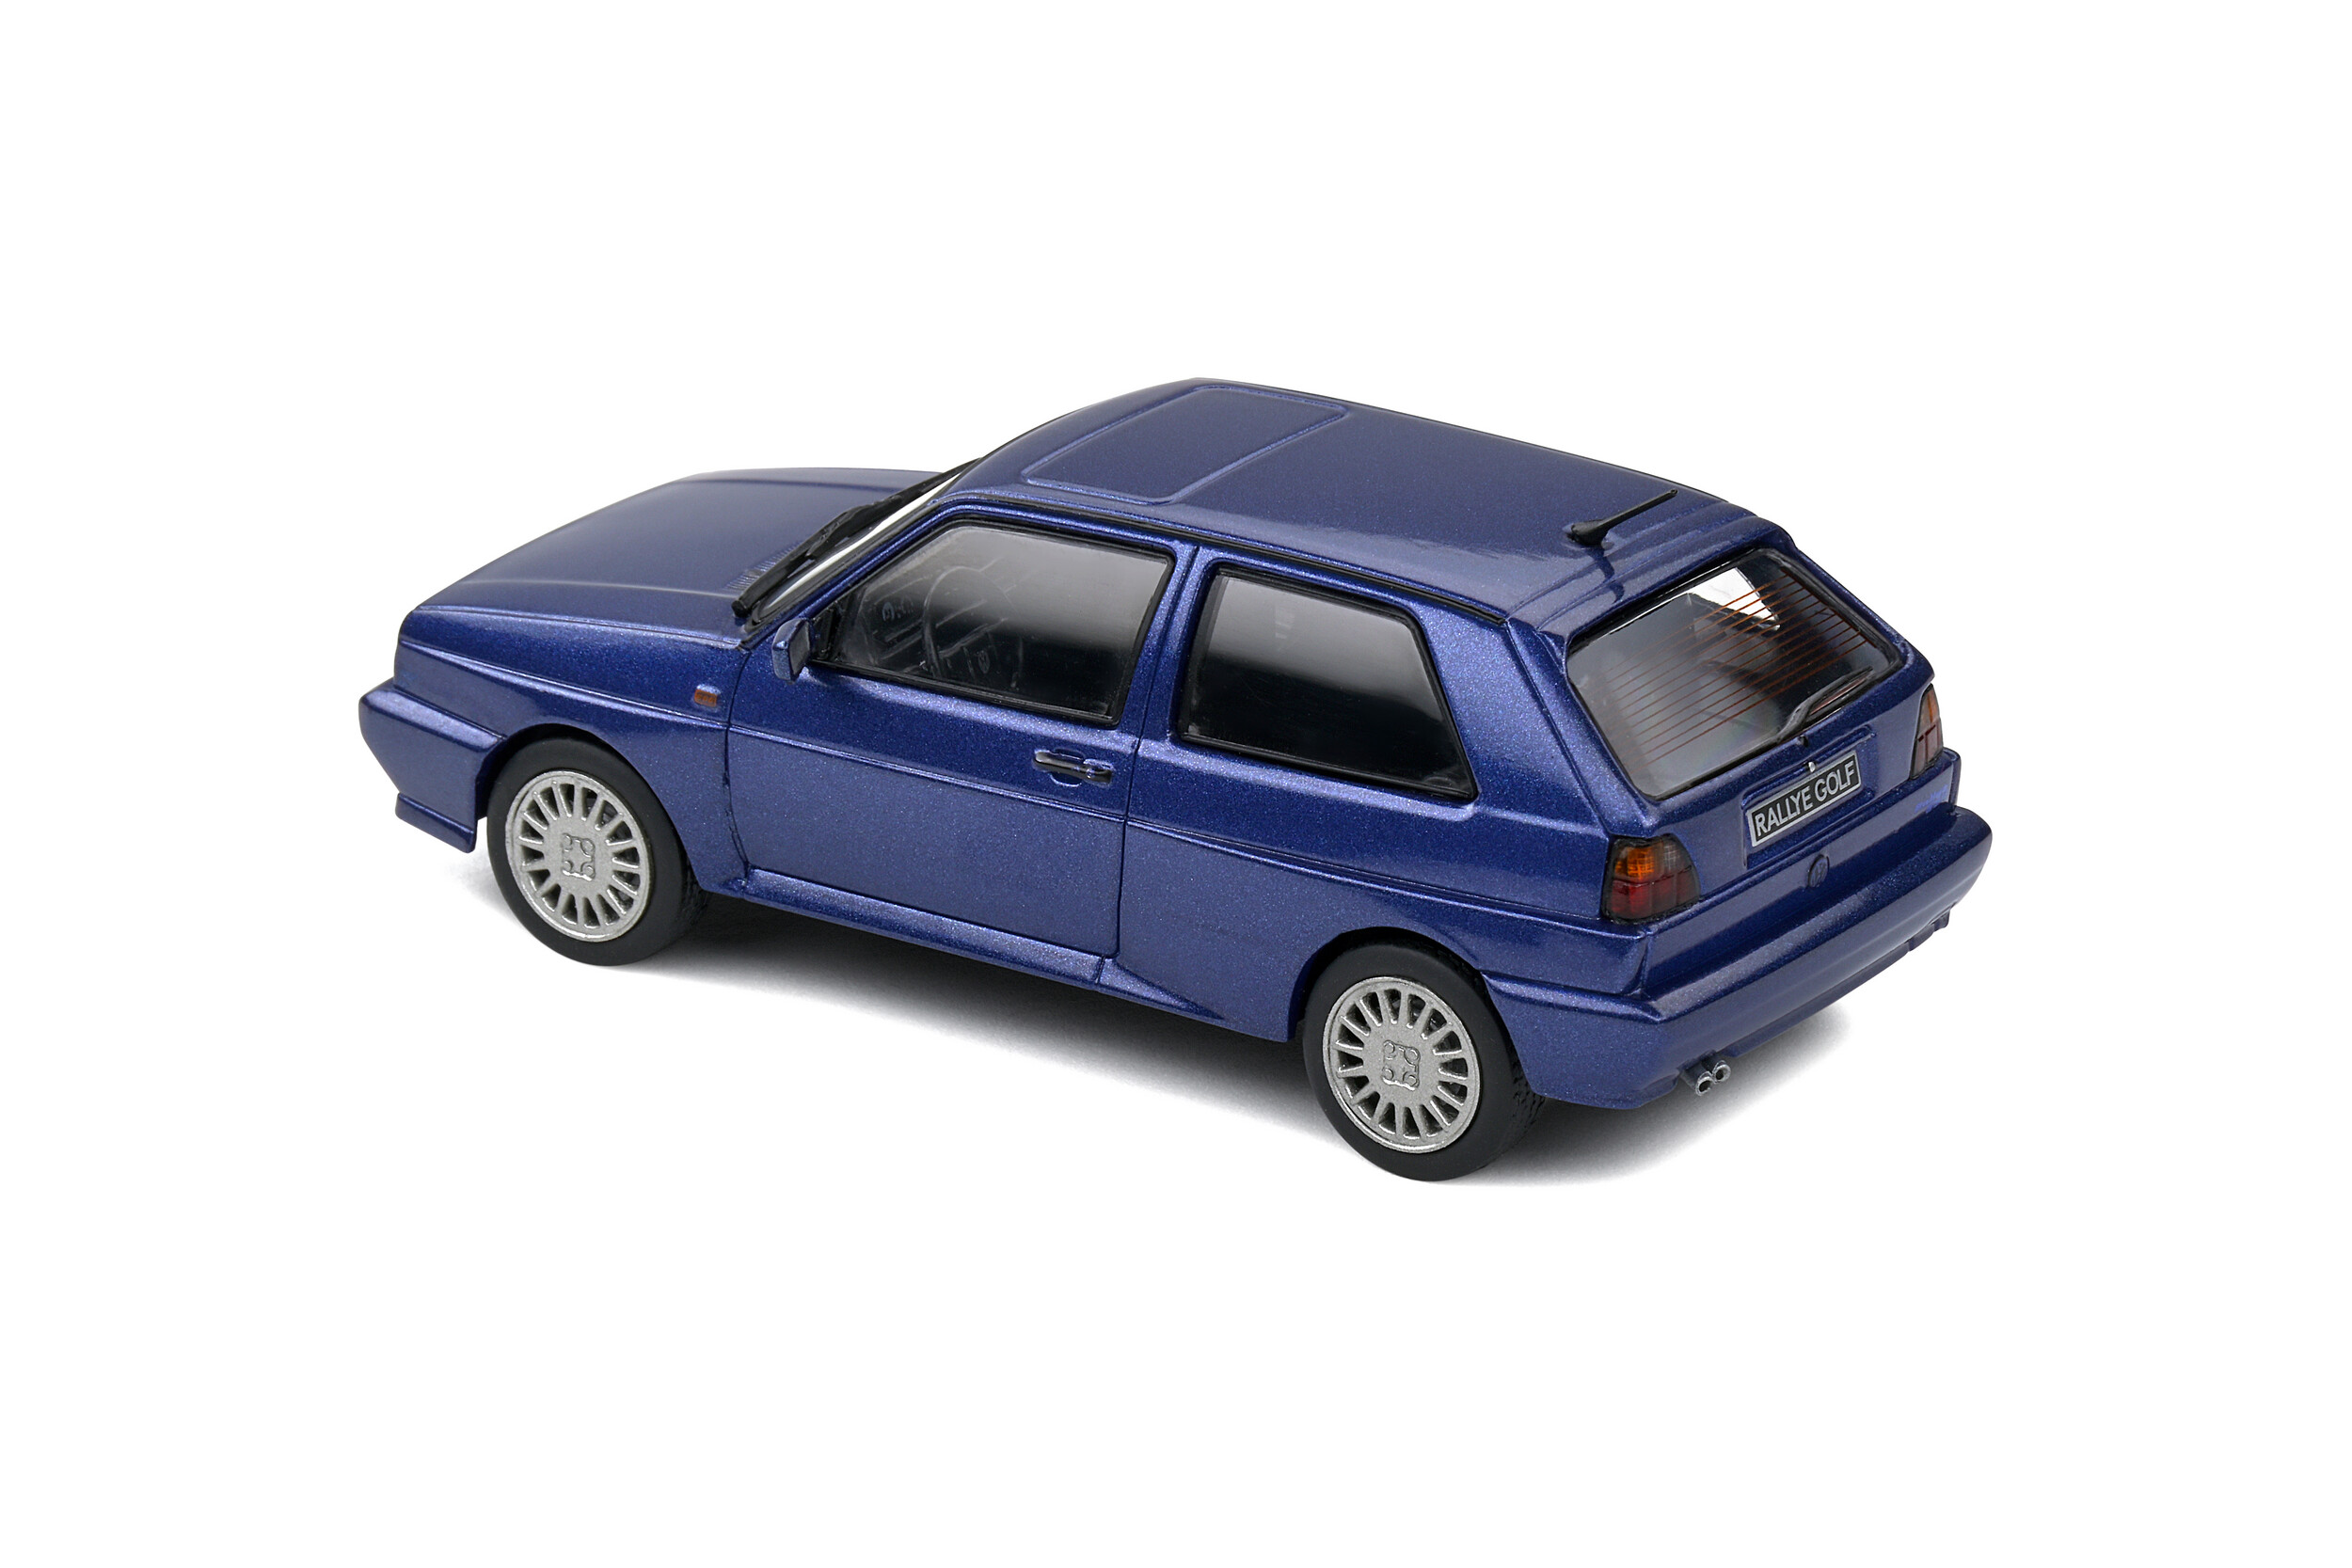 Volkswagen Golf Rally - Blue Pearl - 1989 - Solido